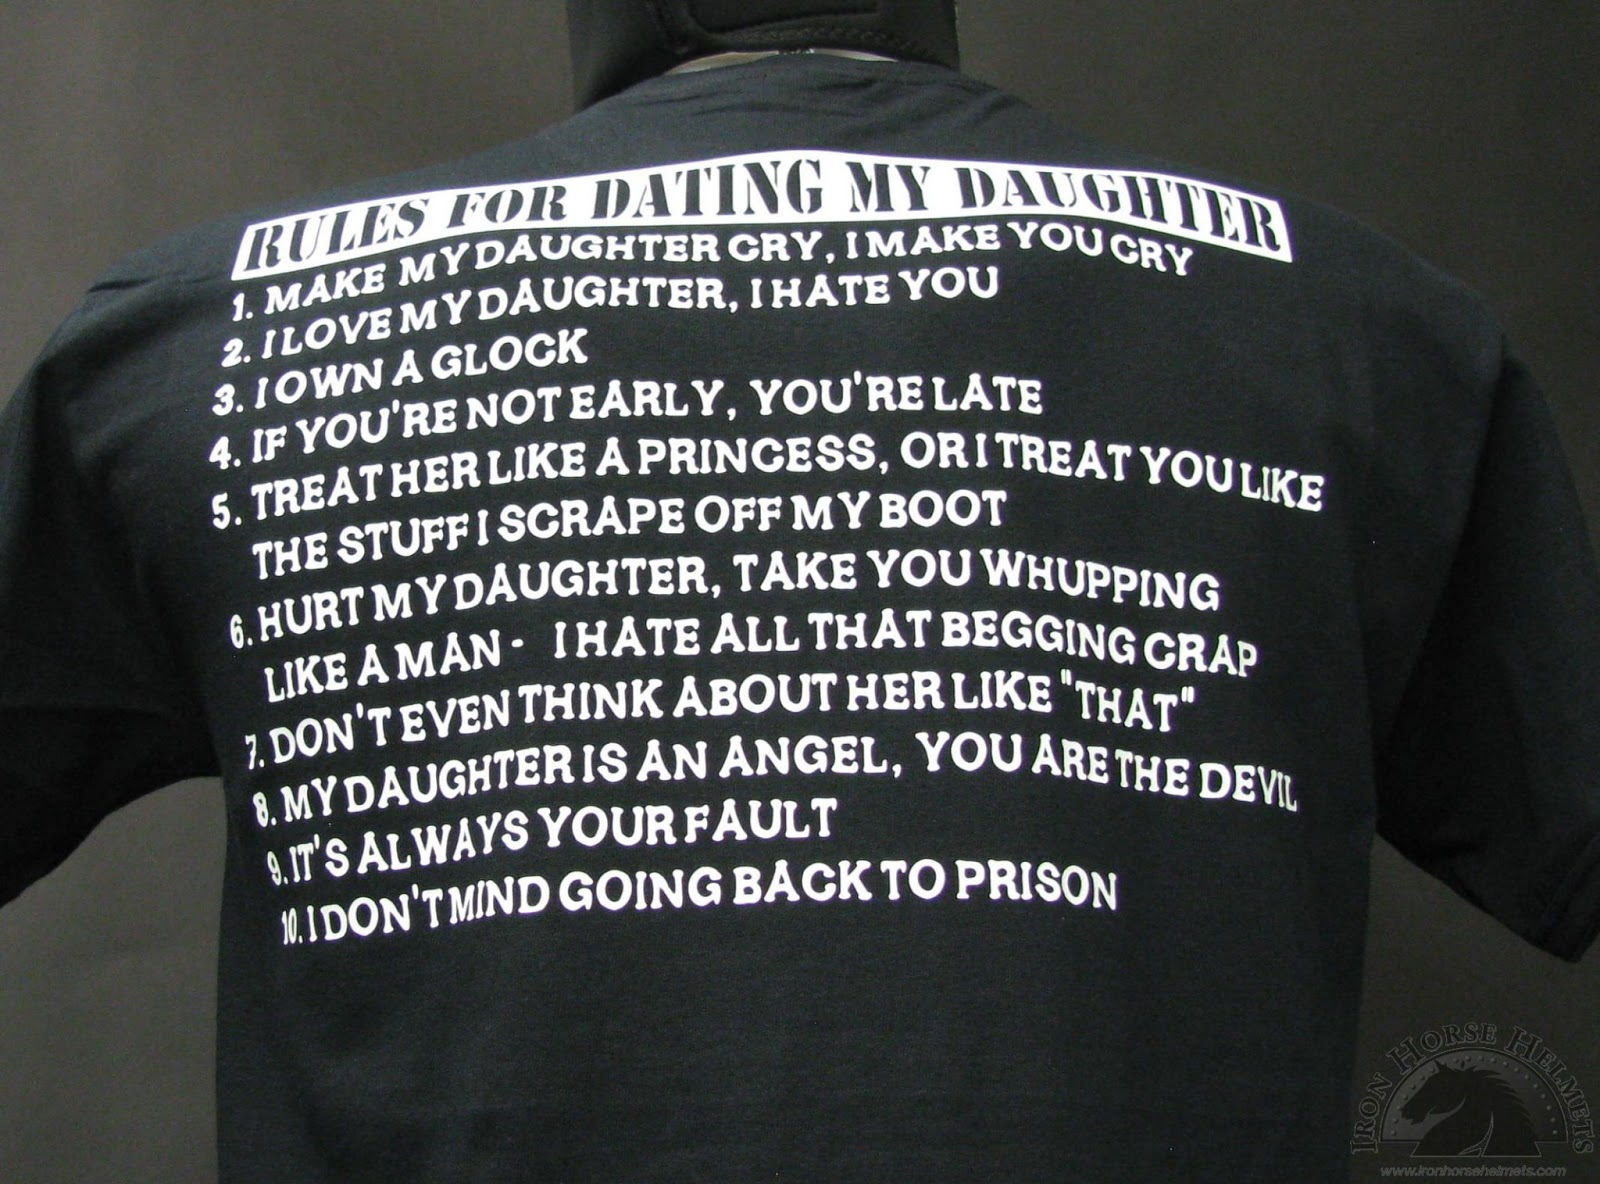 Rules for dating my daughter shirt in Detroit